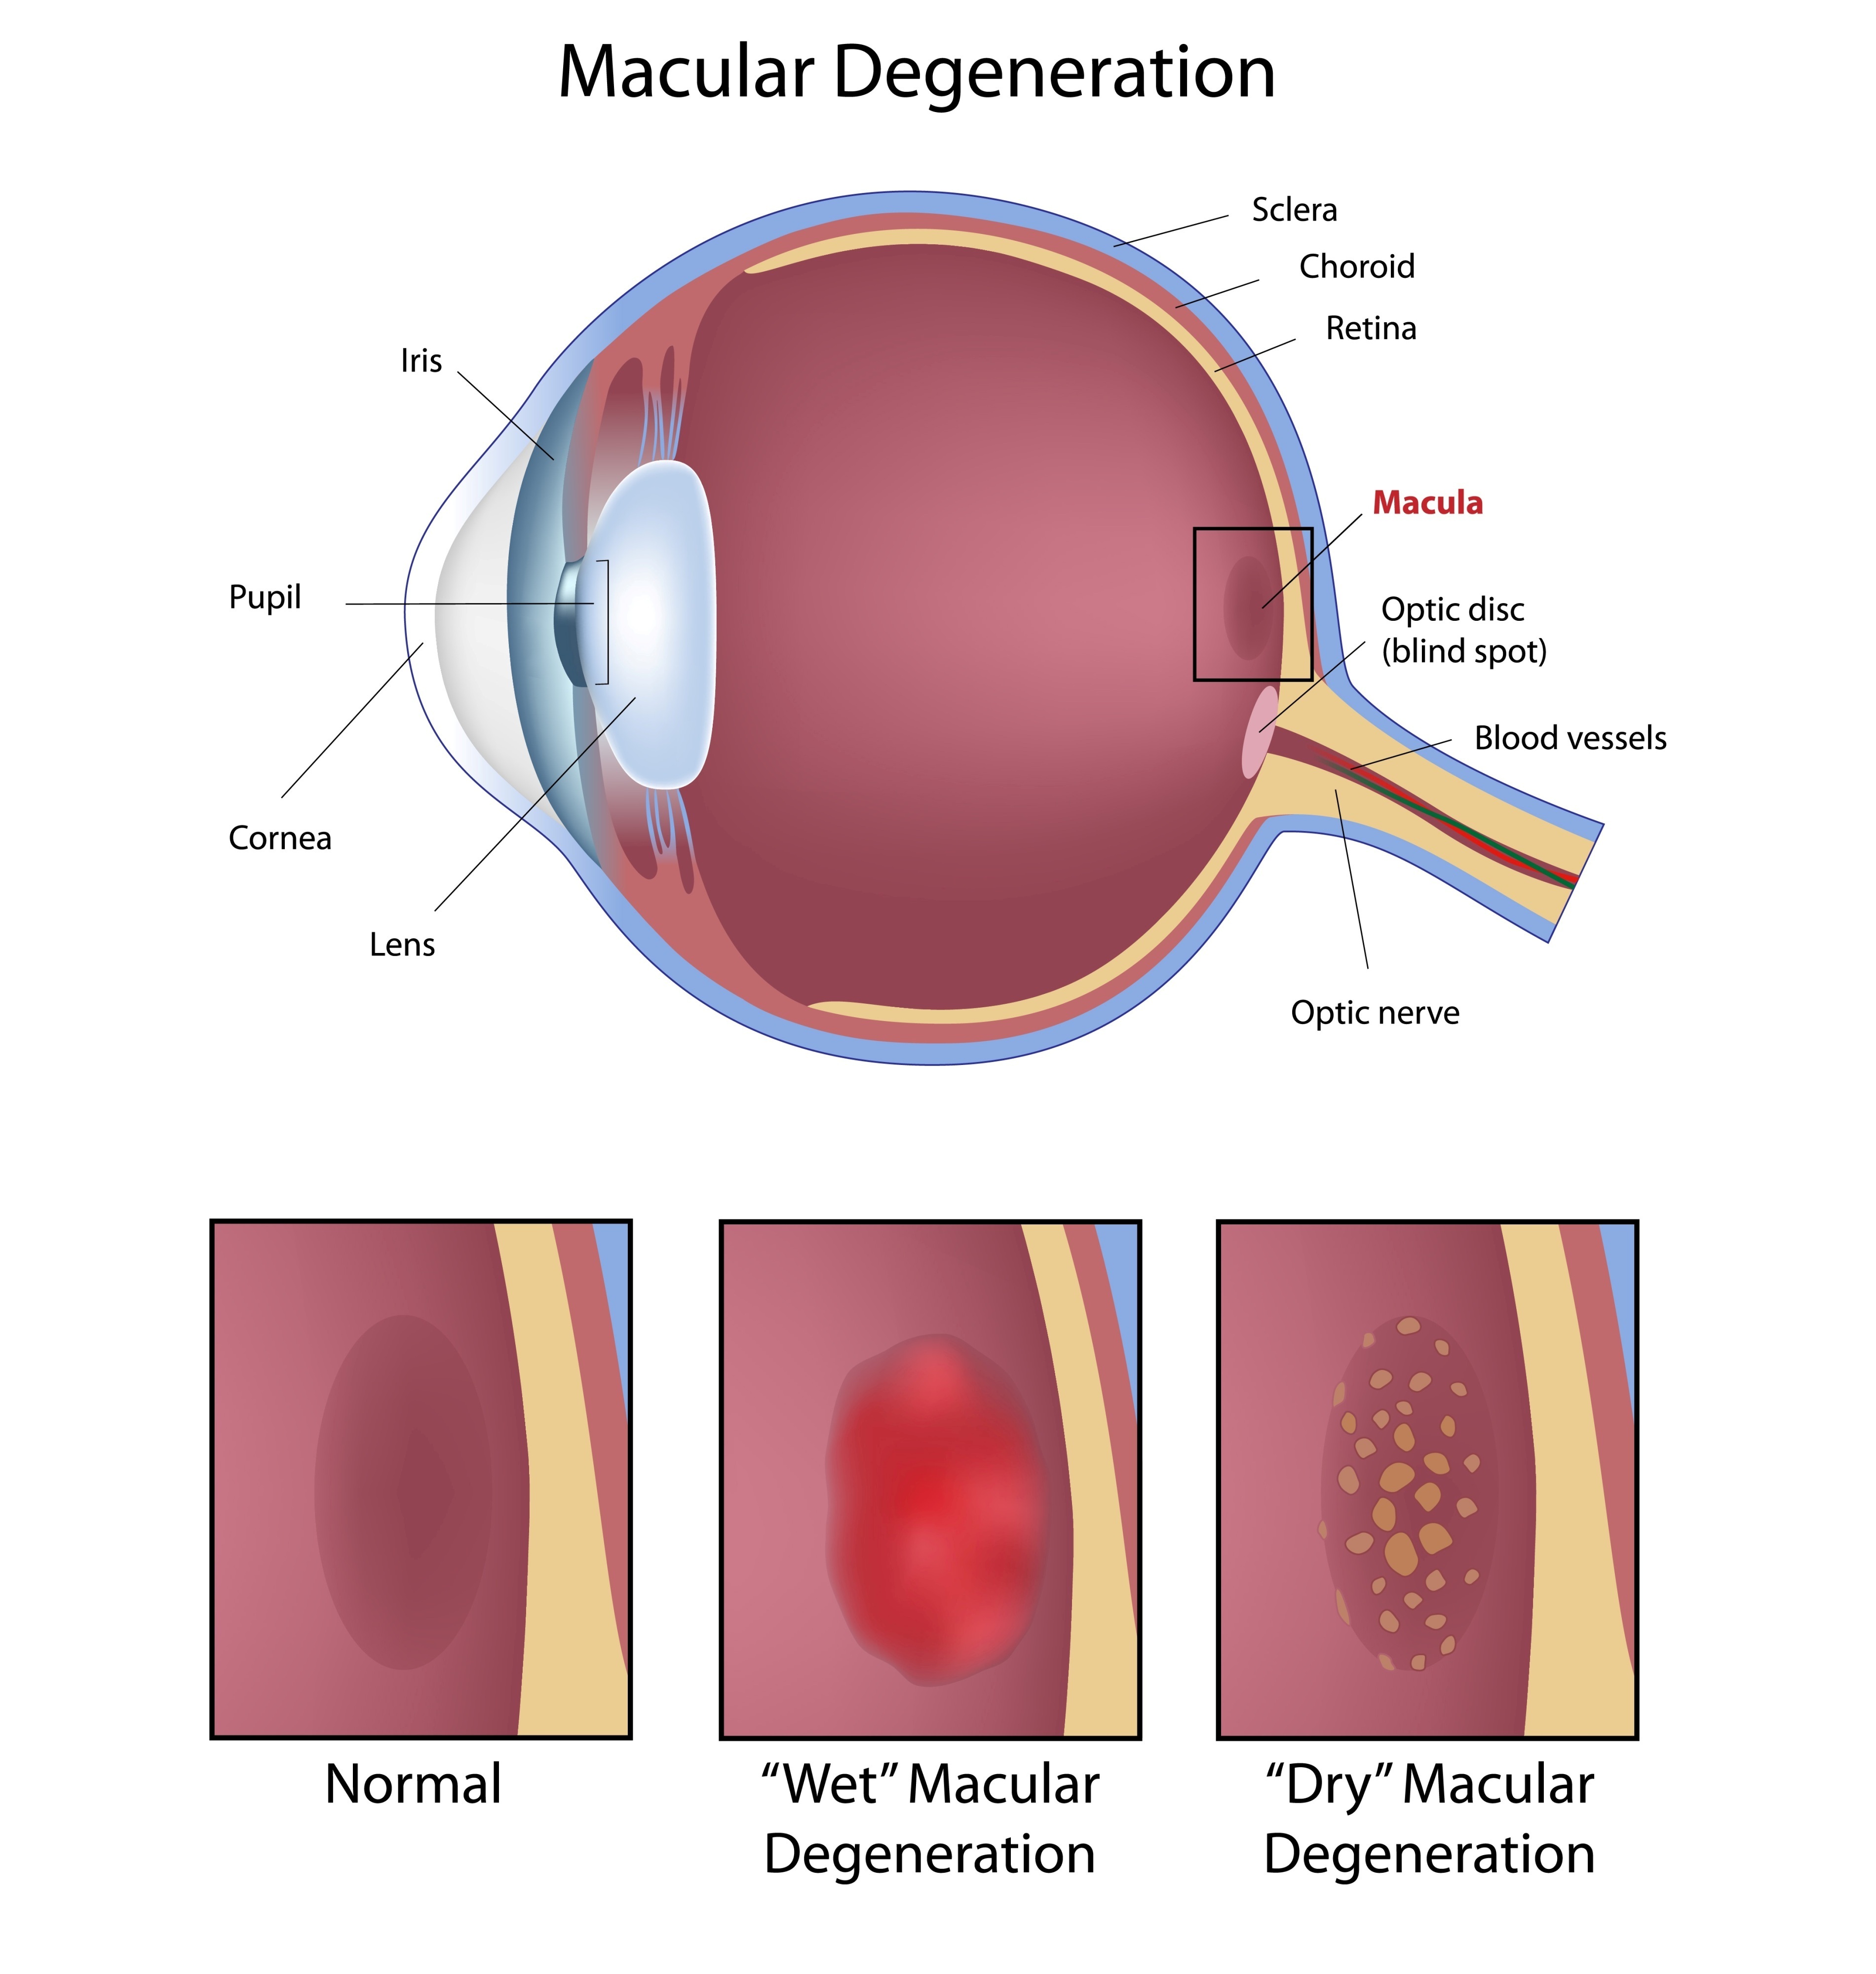 Macular Degeneration affects the central area of the retina responsible for sharp central vision needed for reading and seeing details.